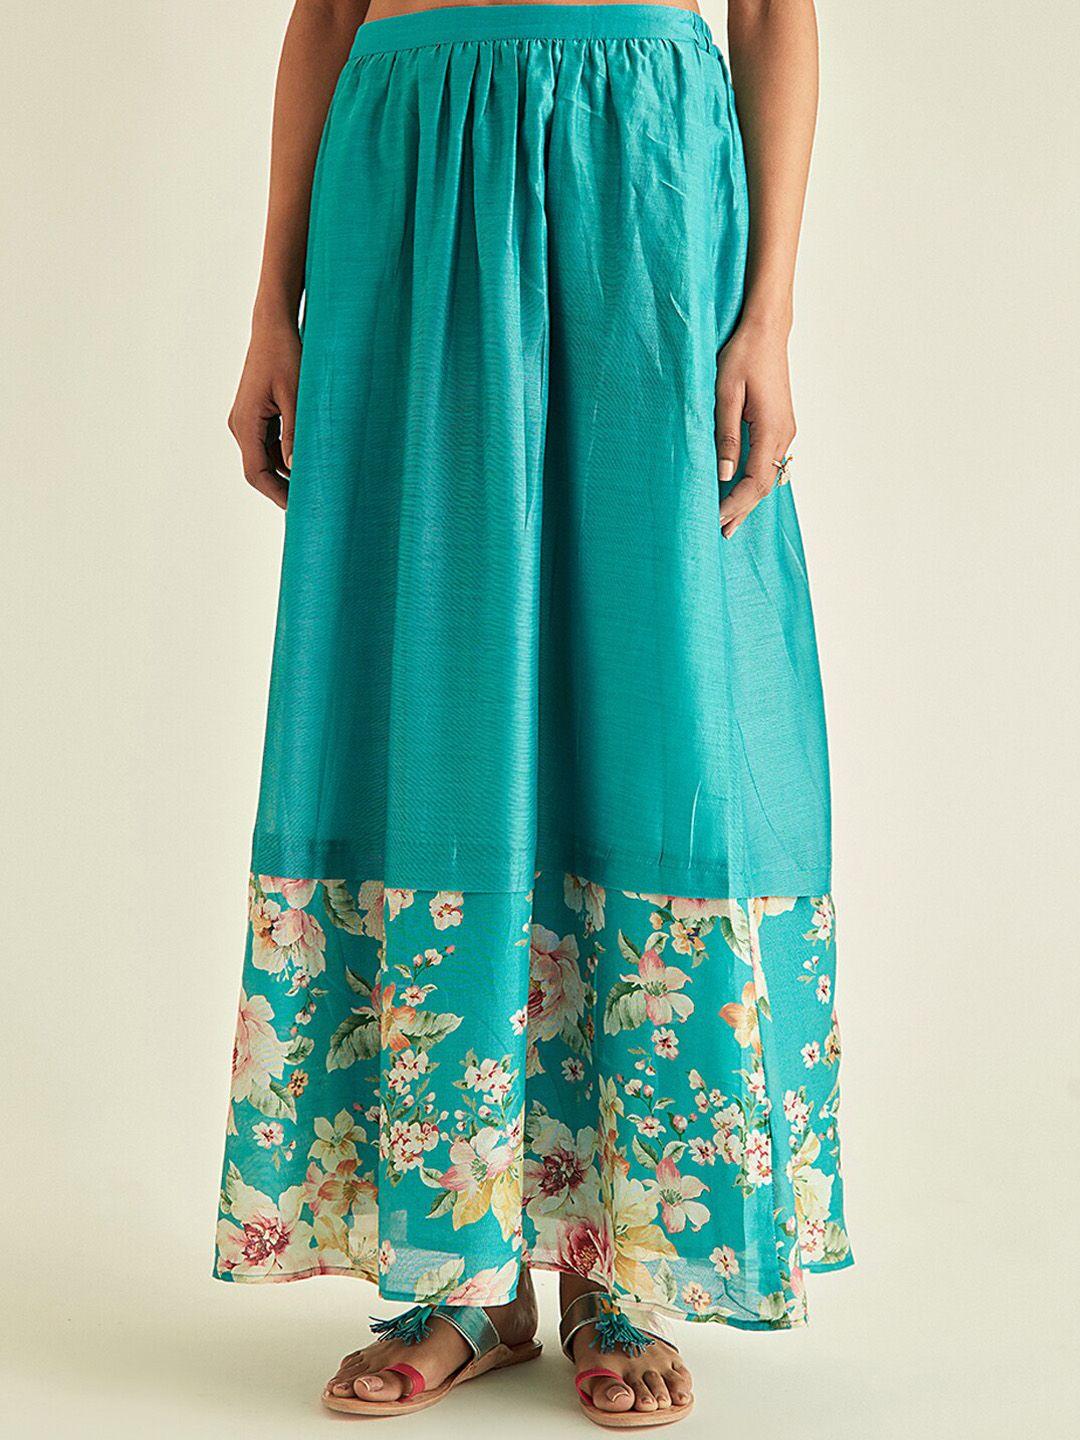 ancestry-women-turquoise-blue-floral-printed-flared-silk-blend-skirt